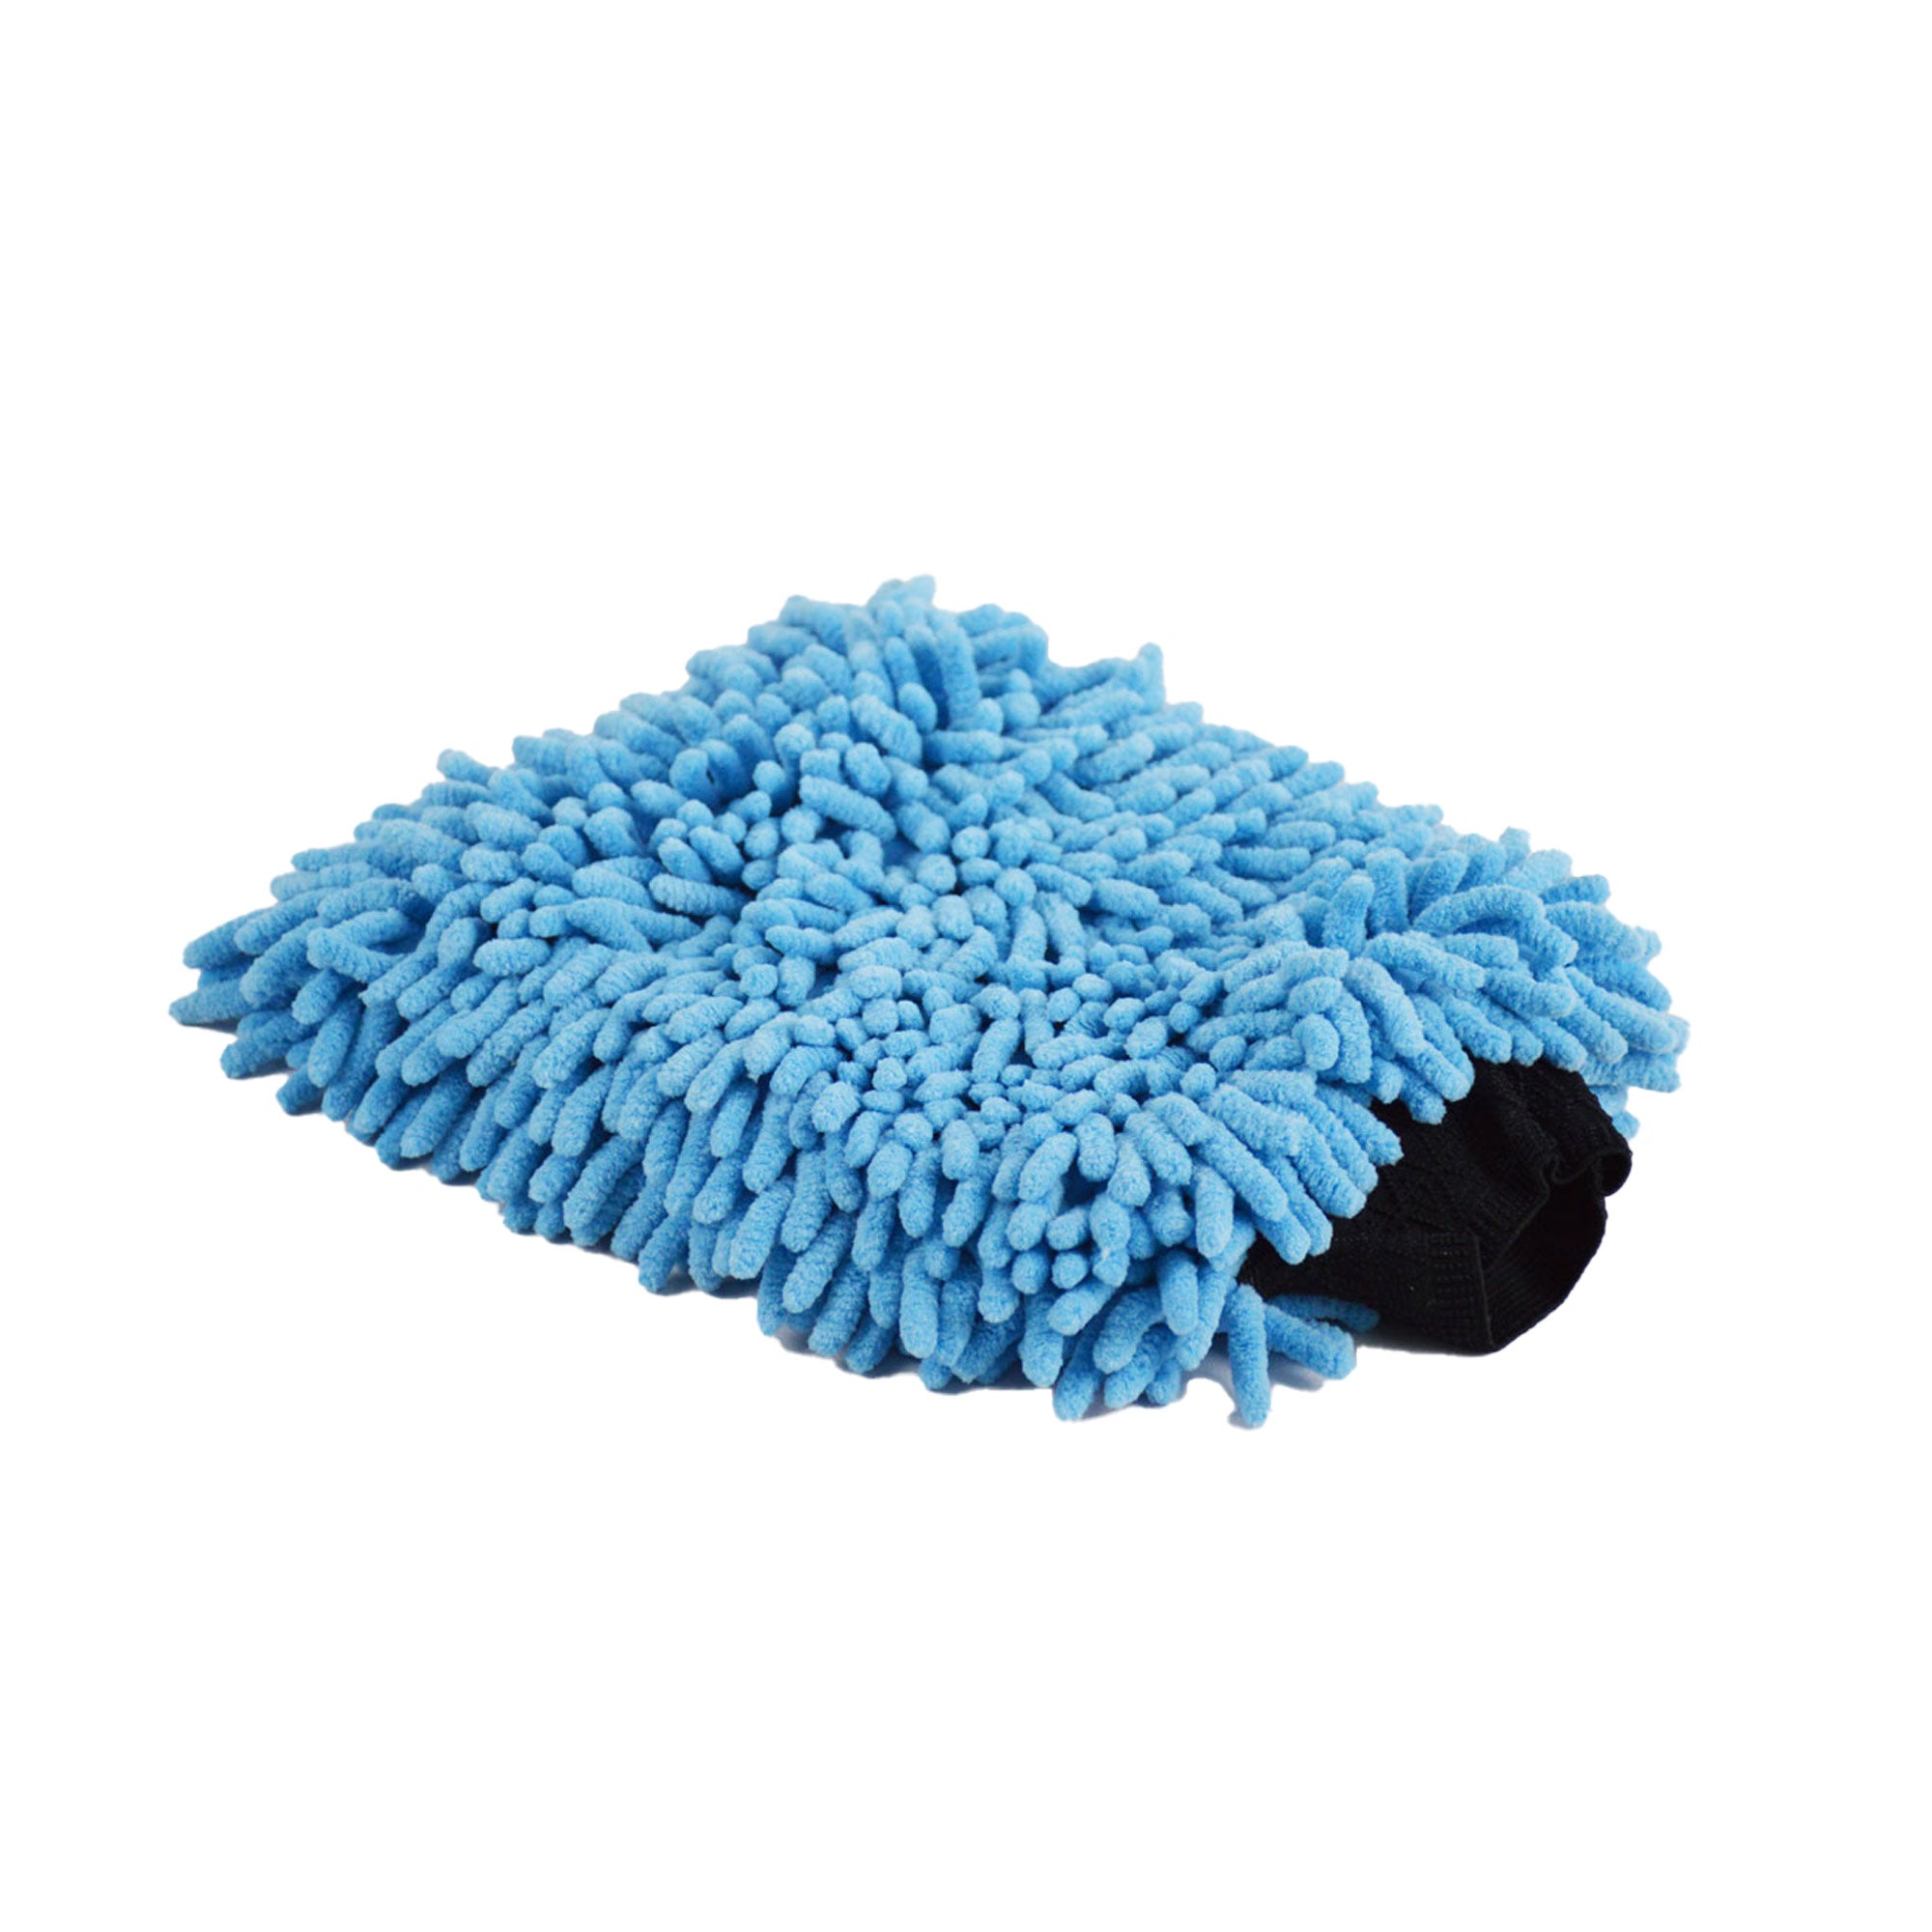 Car Wash Glove Chenille Coral Soft Microfiber Gloves Car Cleaning